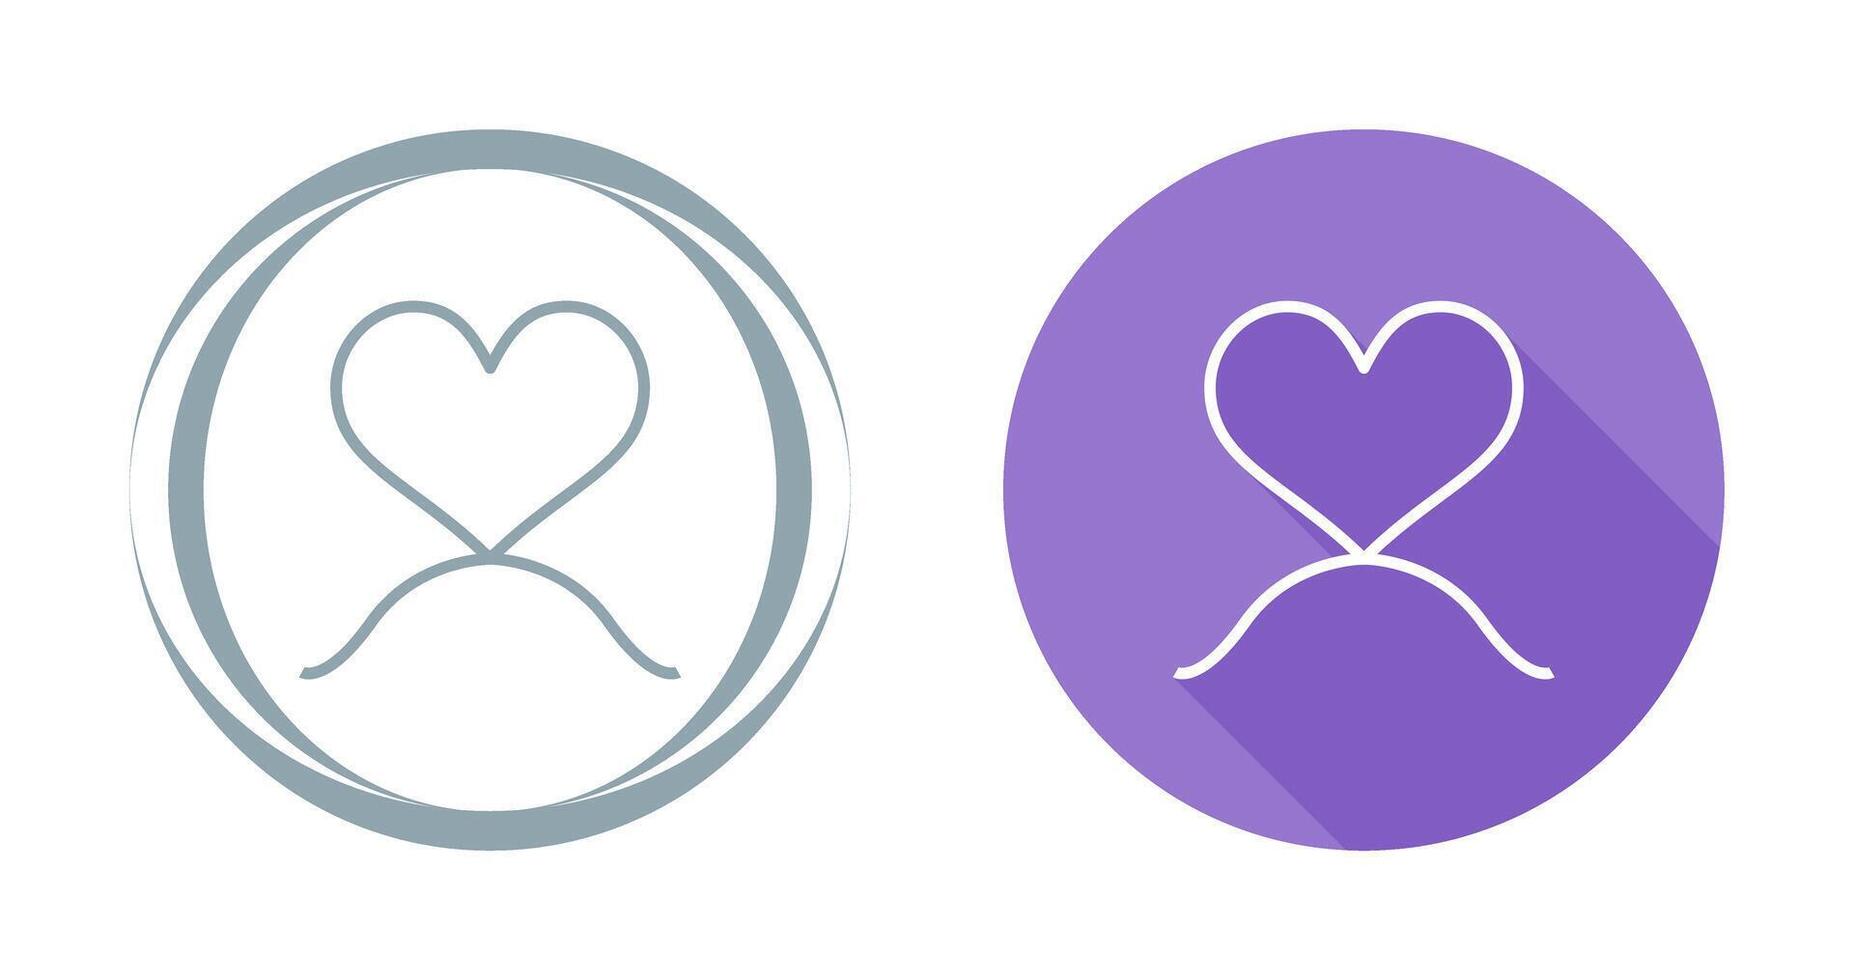 Love knot Vector Icon